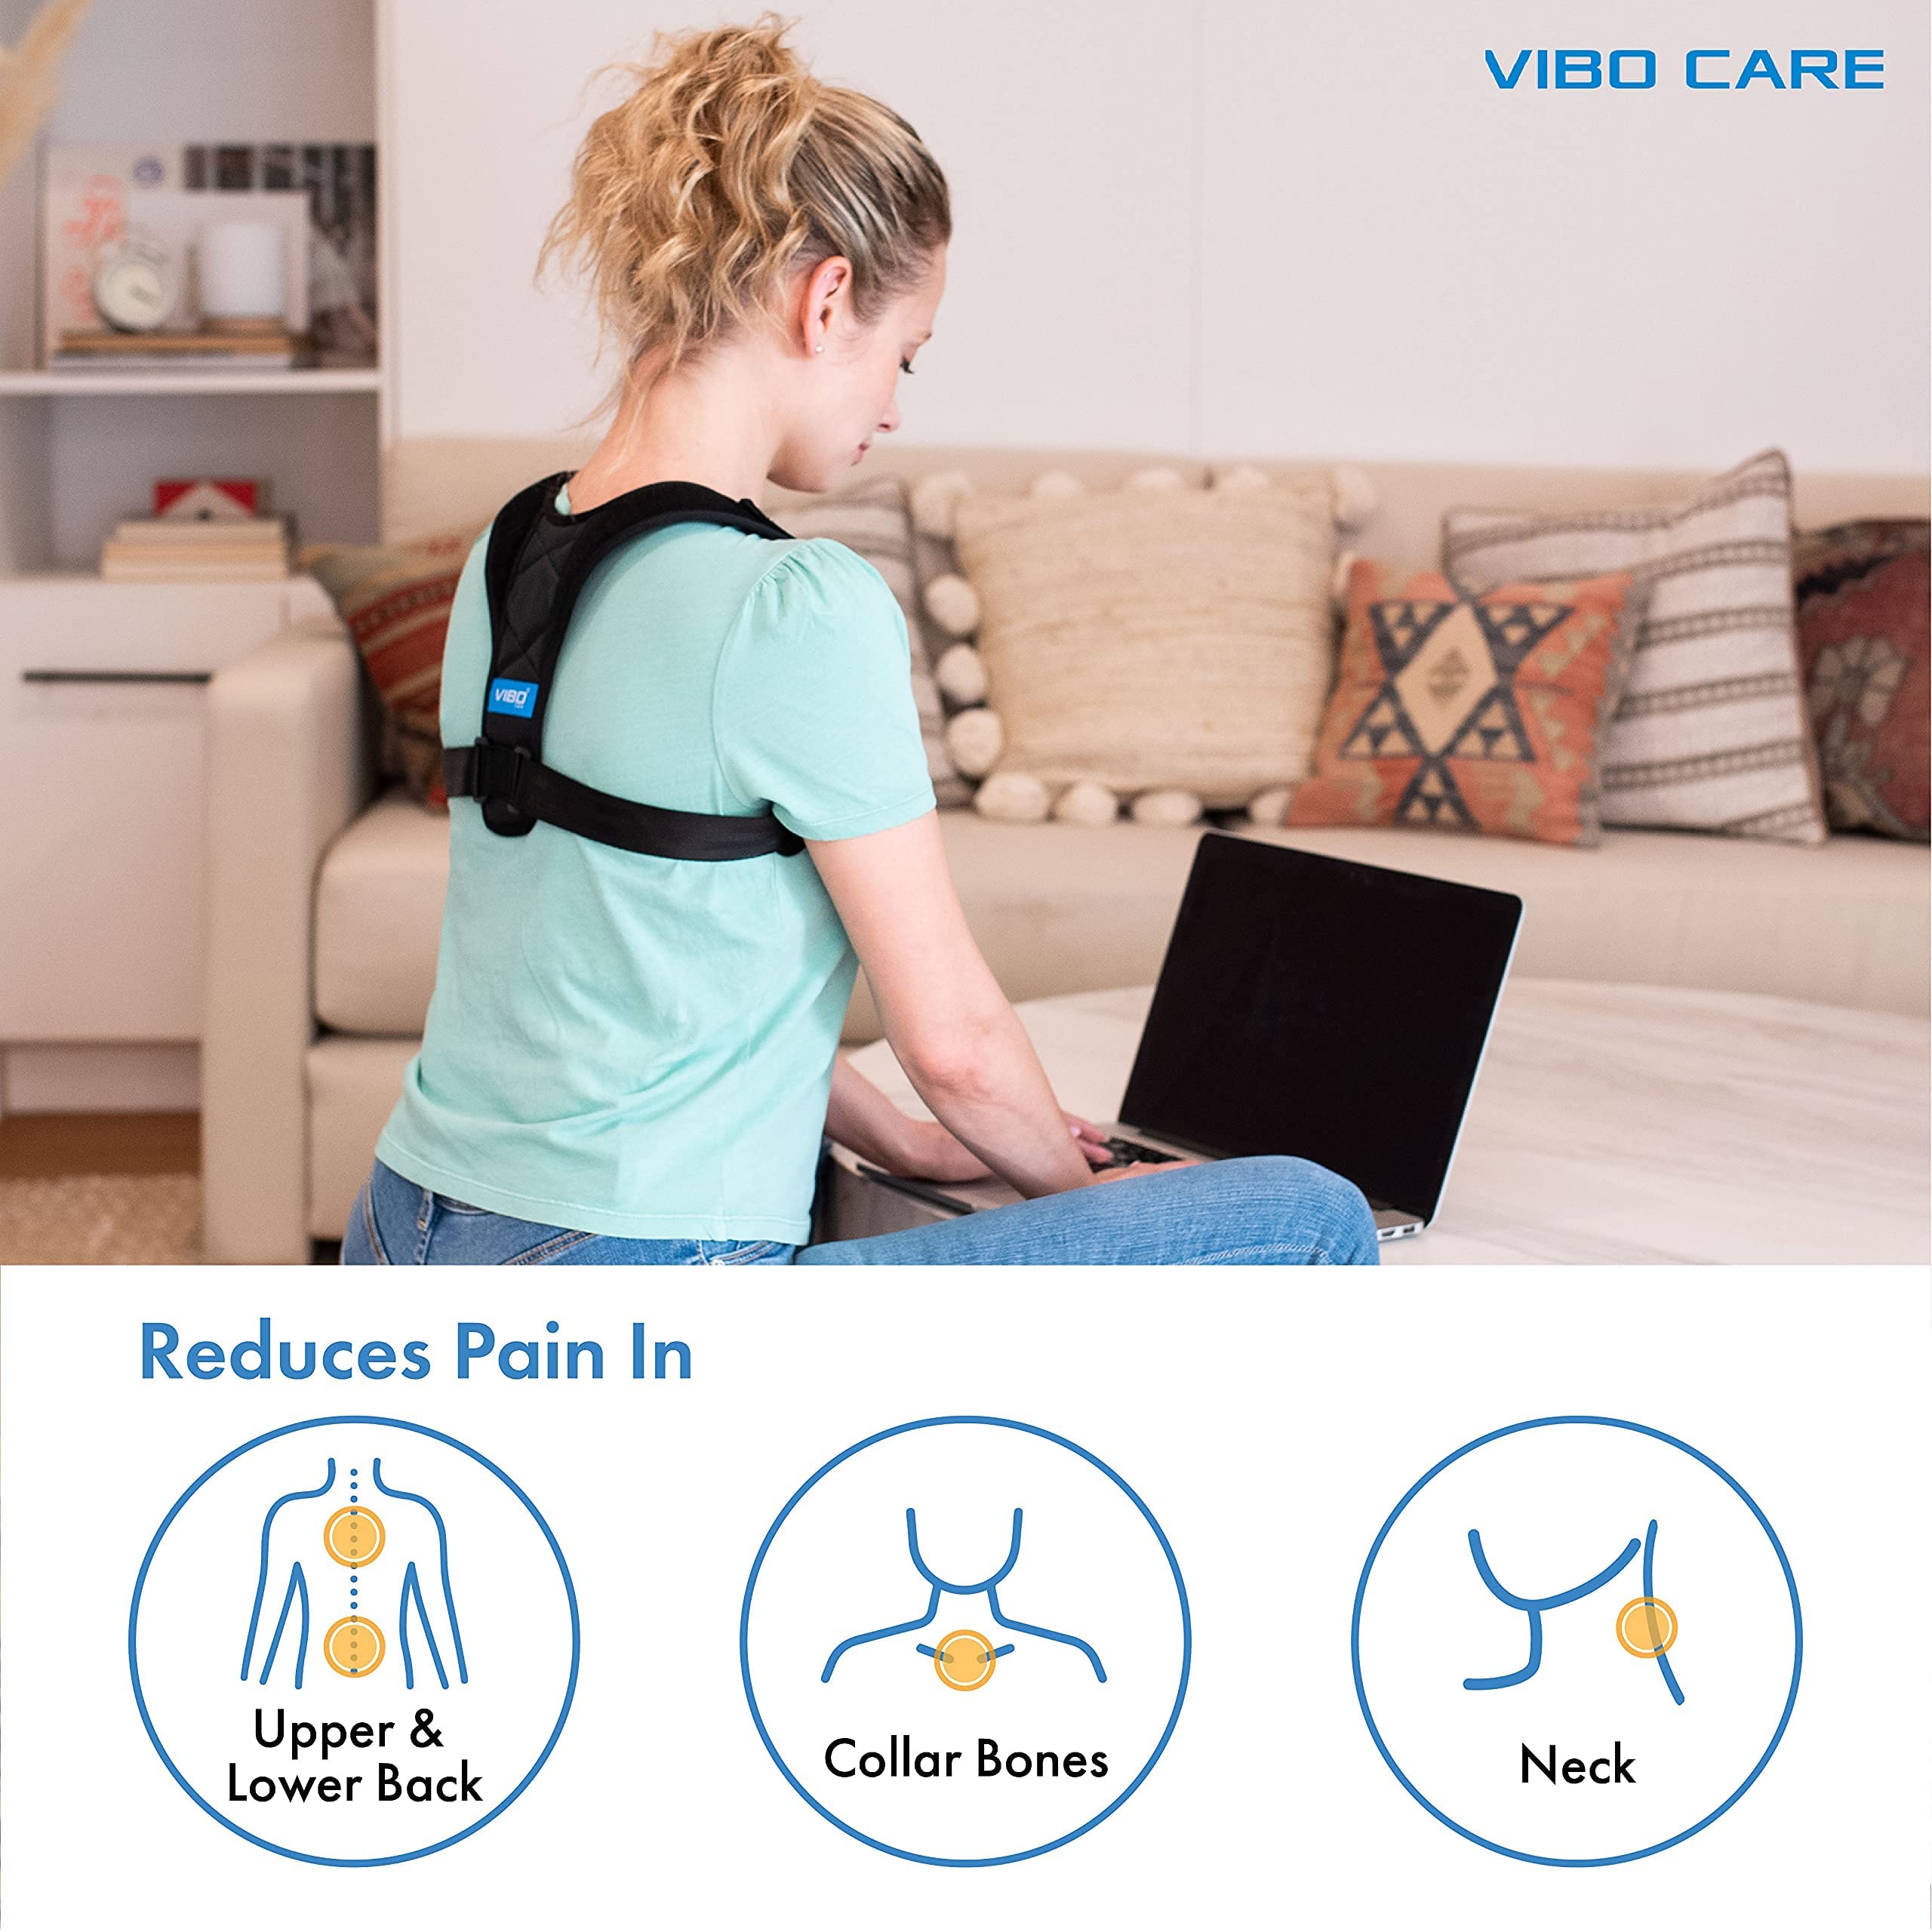 Posture Corrector for Men and Women - Back Brace for Posture - Upper Back Straightener Brace, Clavicle Support Adjustable Device for Thoracic Kyphosis & Shoulder - Neck Pain Relief (Fits Chest Size 35